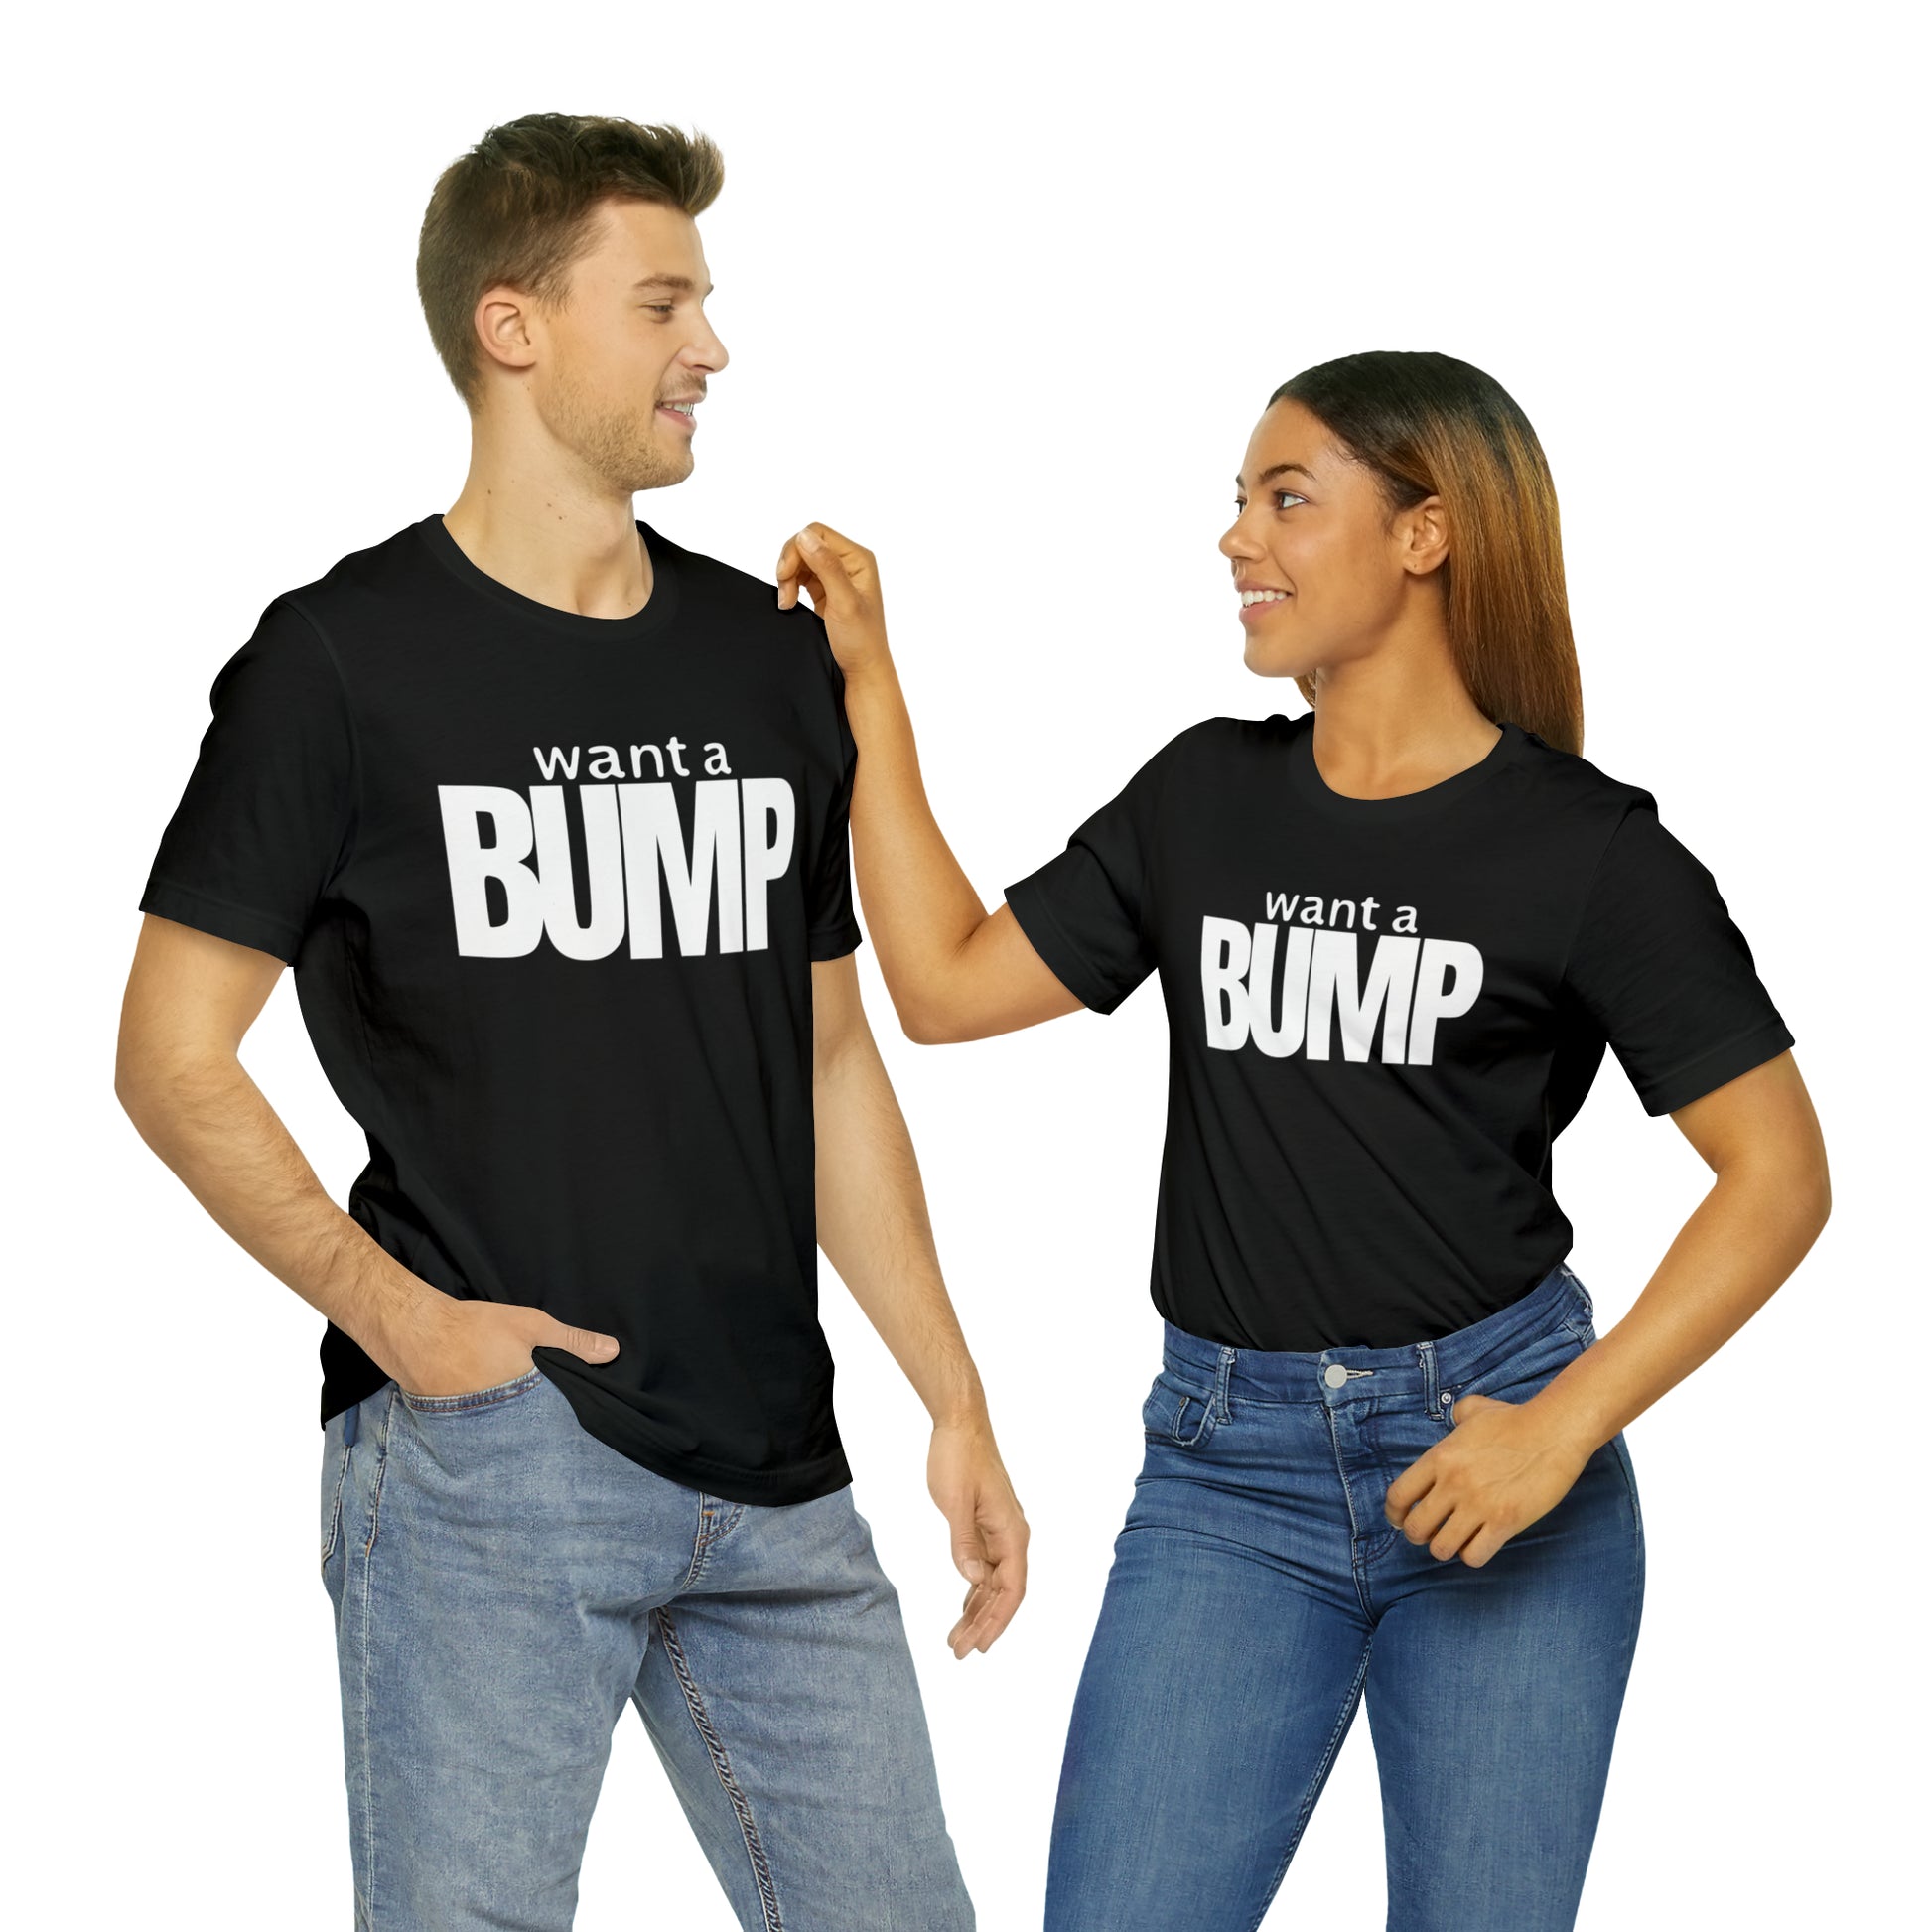 What The Bump Wants The Bump Gets - Maternity Short Sleeve T-Shirt